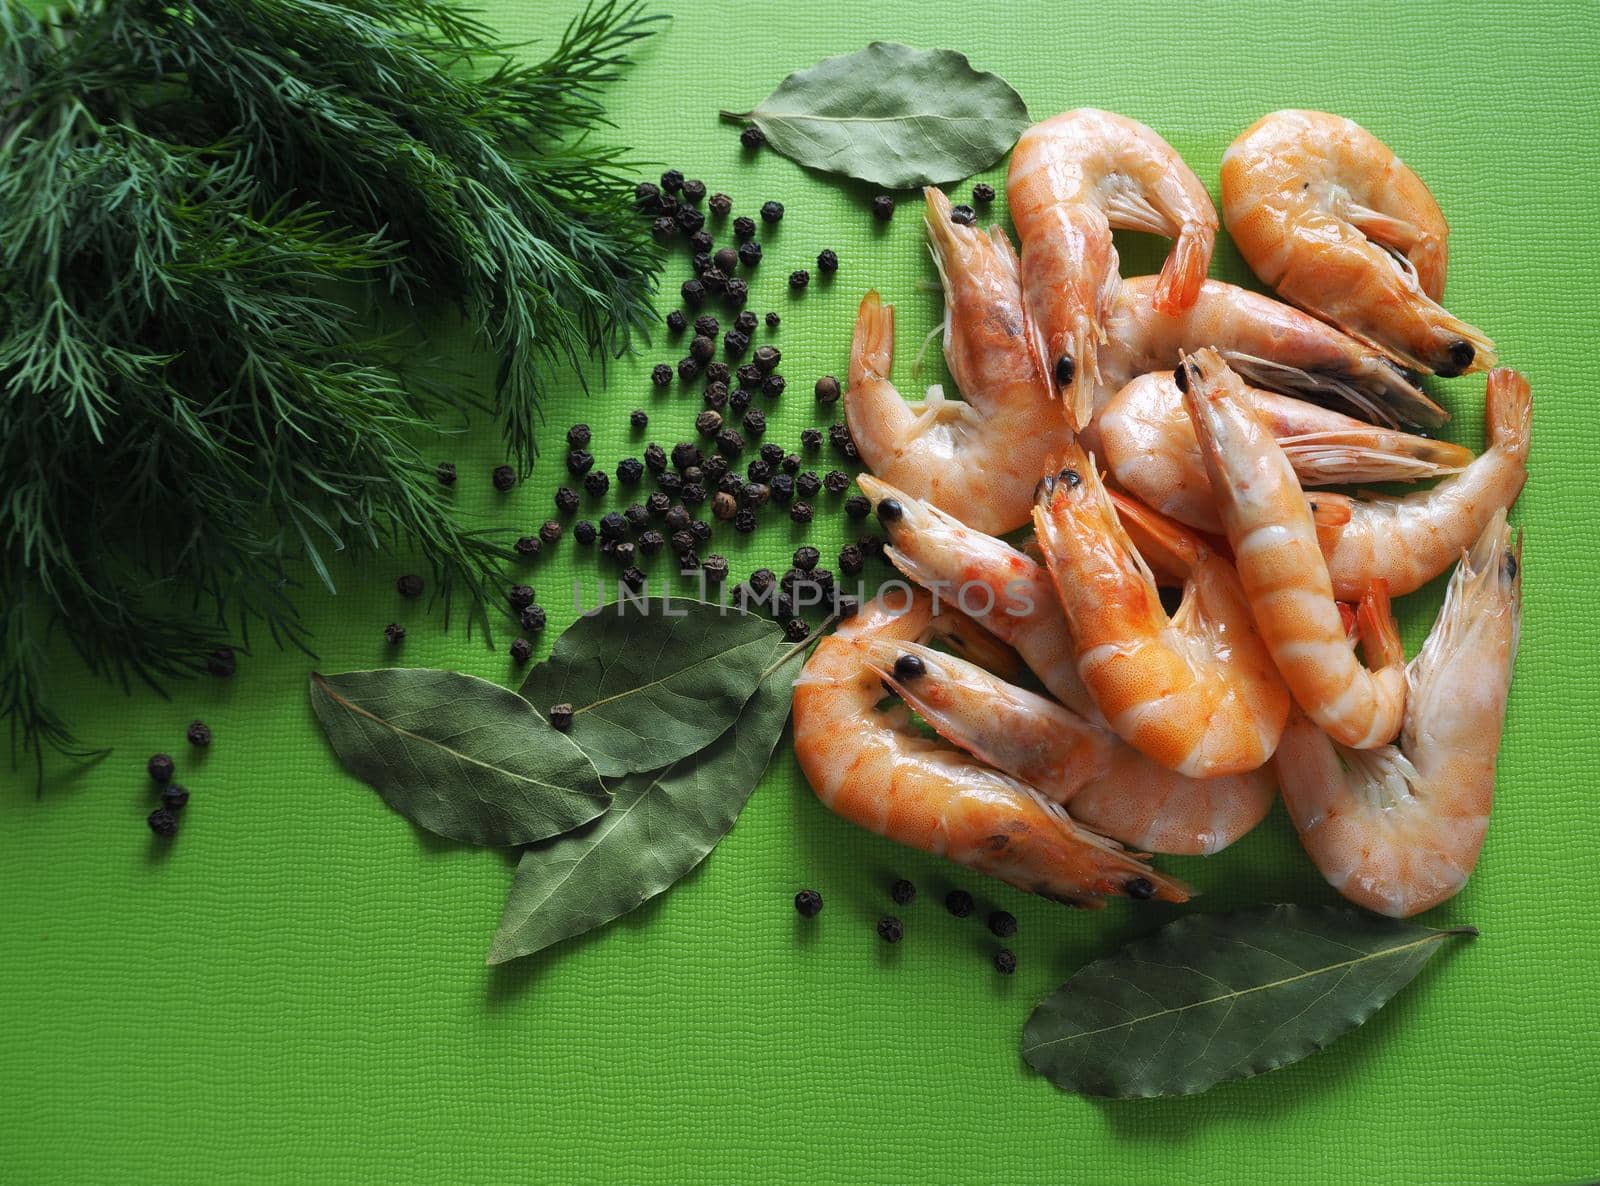 Prawns are royal with herbs and spices on a green background. Close-up.